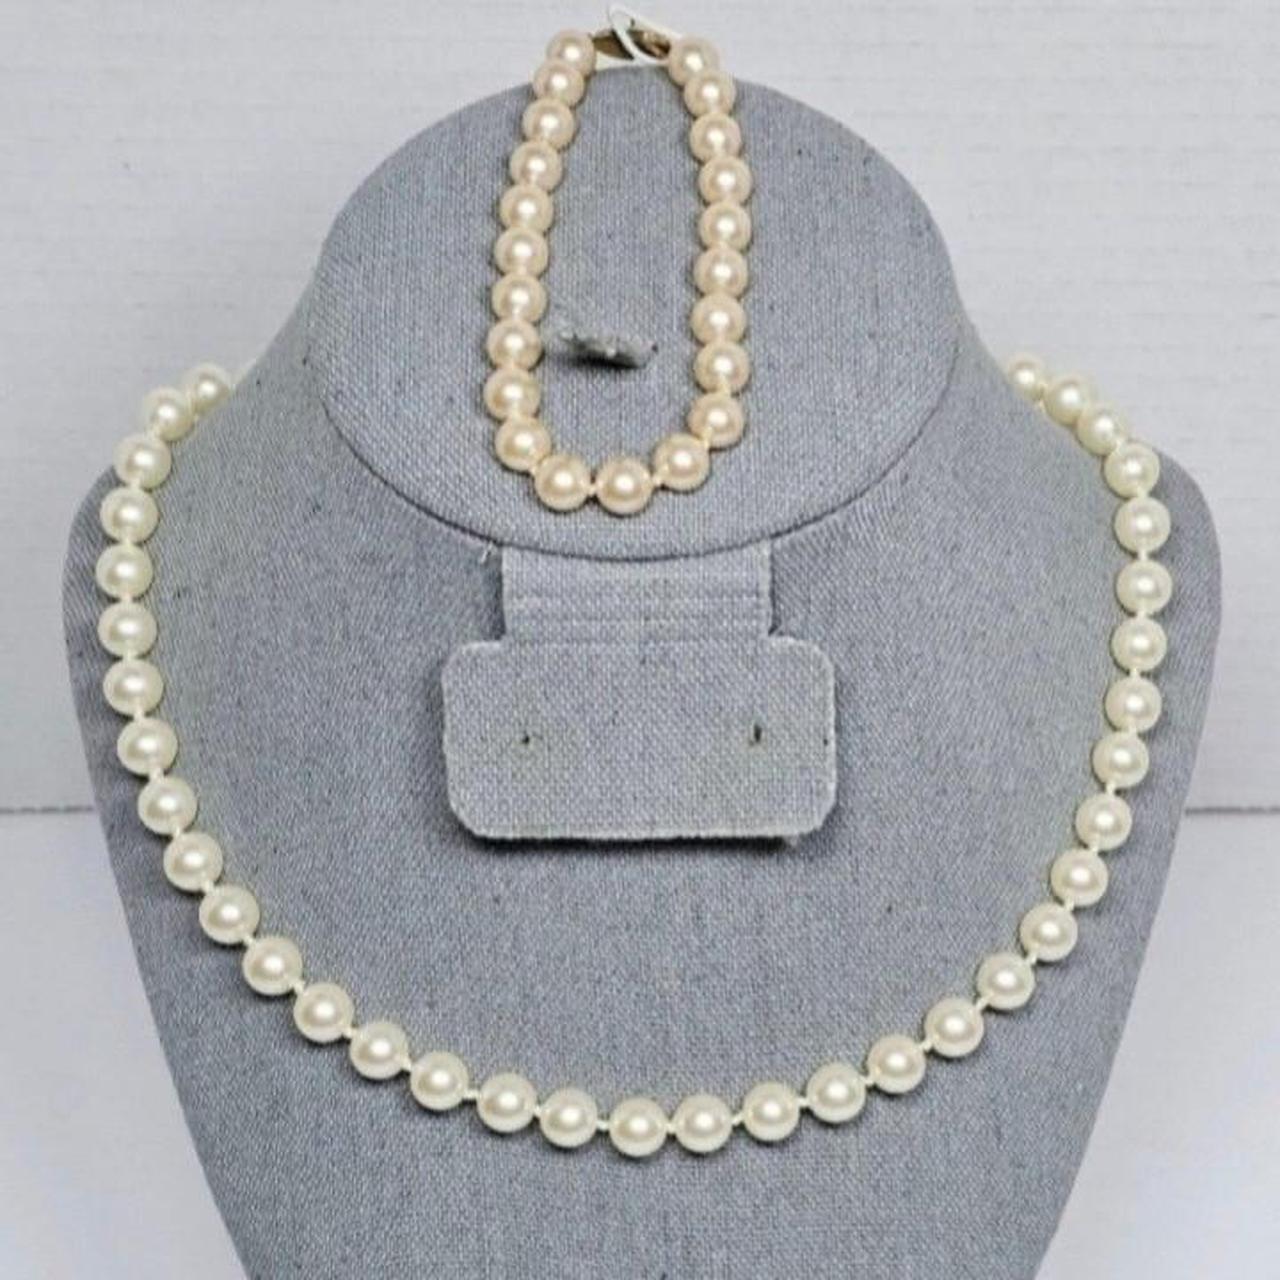 Monet Jewelry Simulated Pearl 36 Inch Rolo Strand Necklace, Color: White -  JCPenney